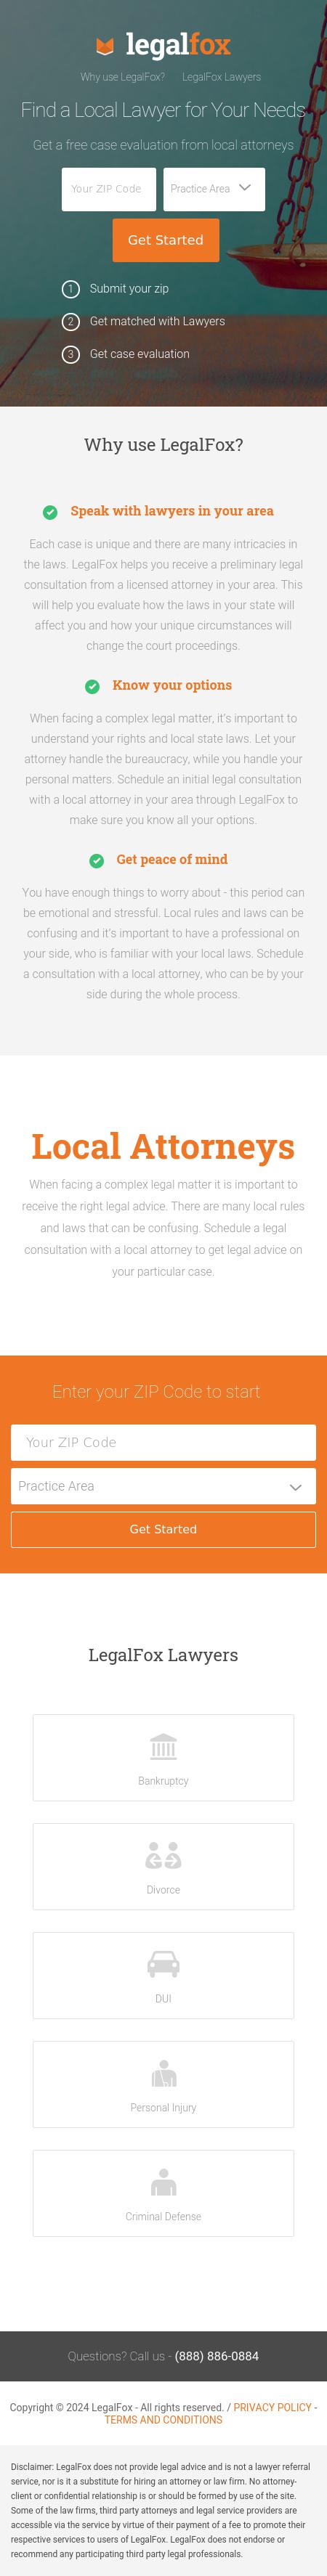 Find a Local Attorney - Baton Rouge LA Lawyers